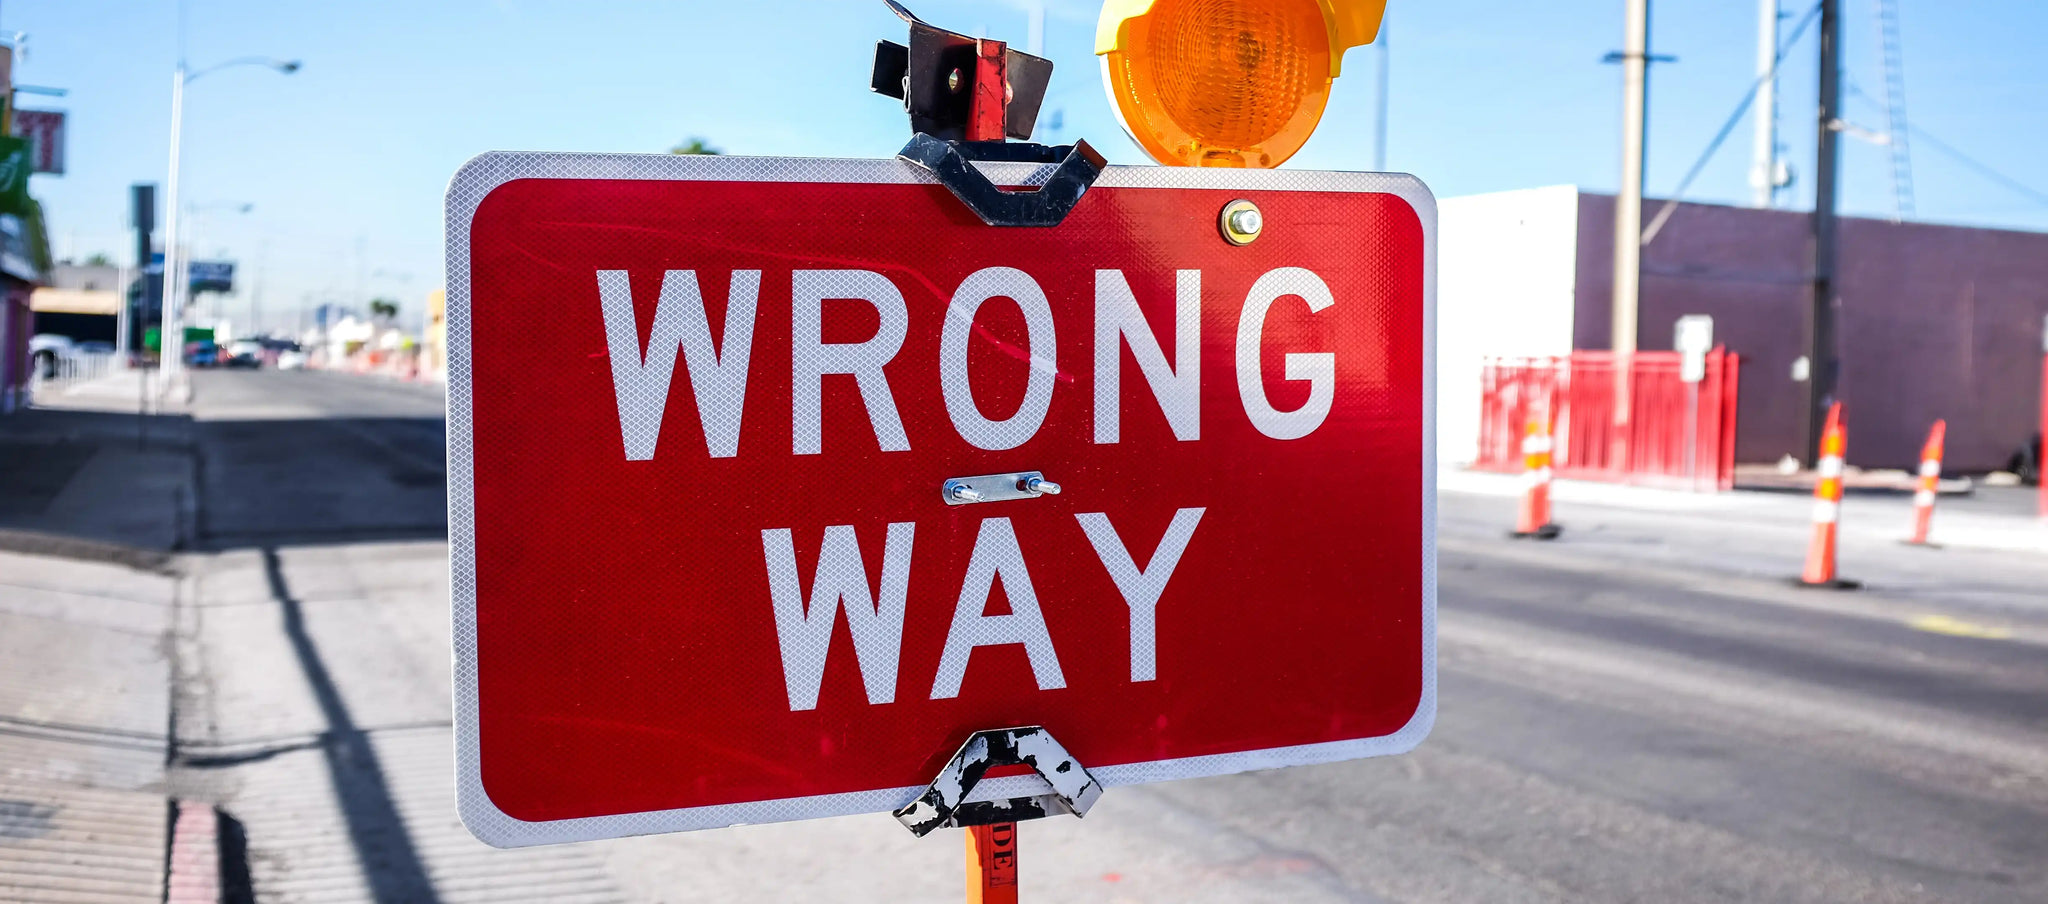 A traffic sign showing "wrong way", as a link to burnout and overwork that cause difficult situations for people